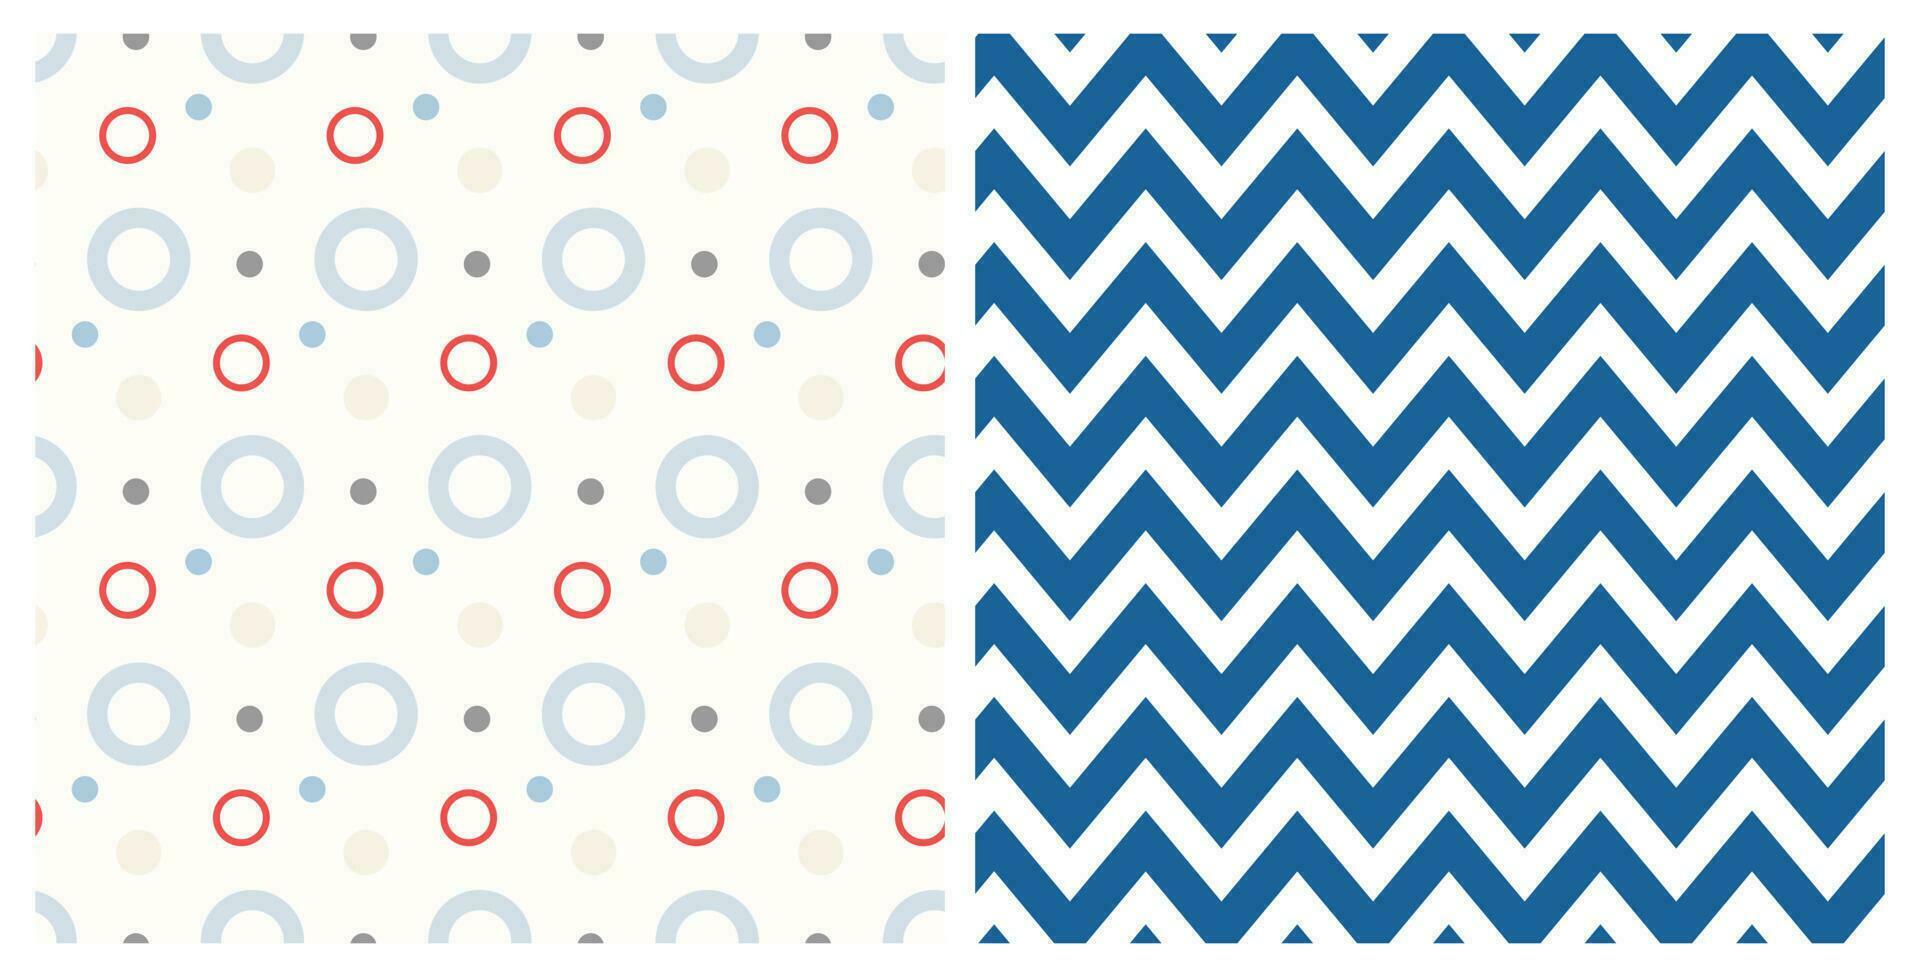 Set of seamless geometric patterns of circles and chevron style. Design for springtime, Mothers day, Easter celebration, scrapbooking, nursery decor, home decor, paper crafts. vector